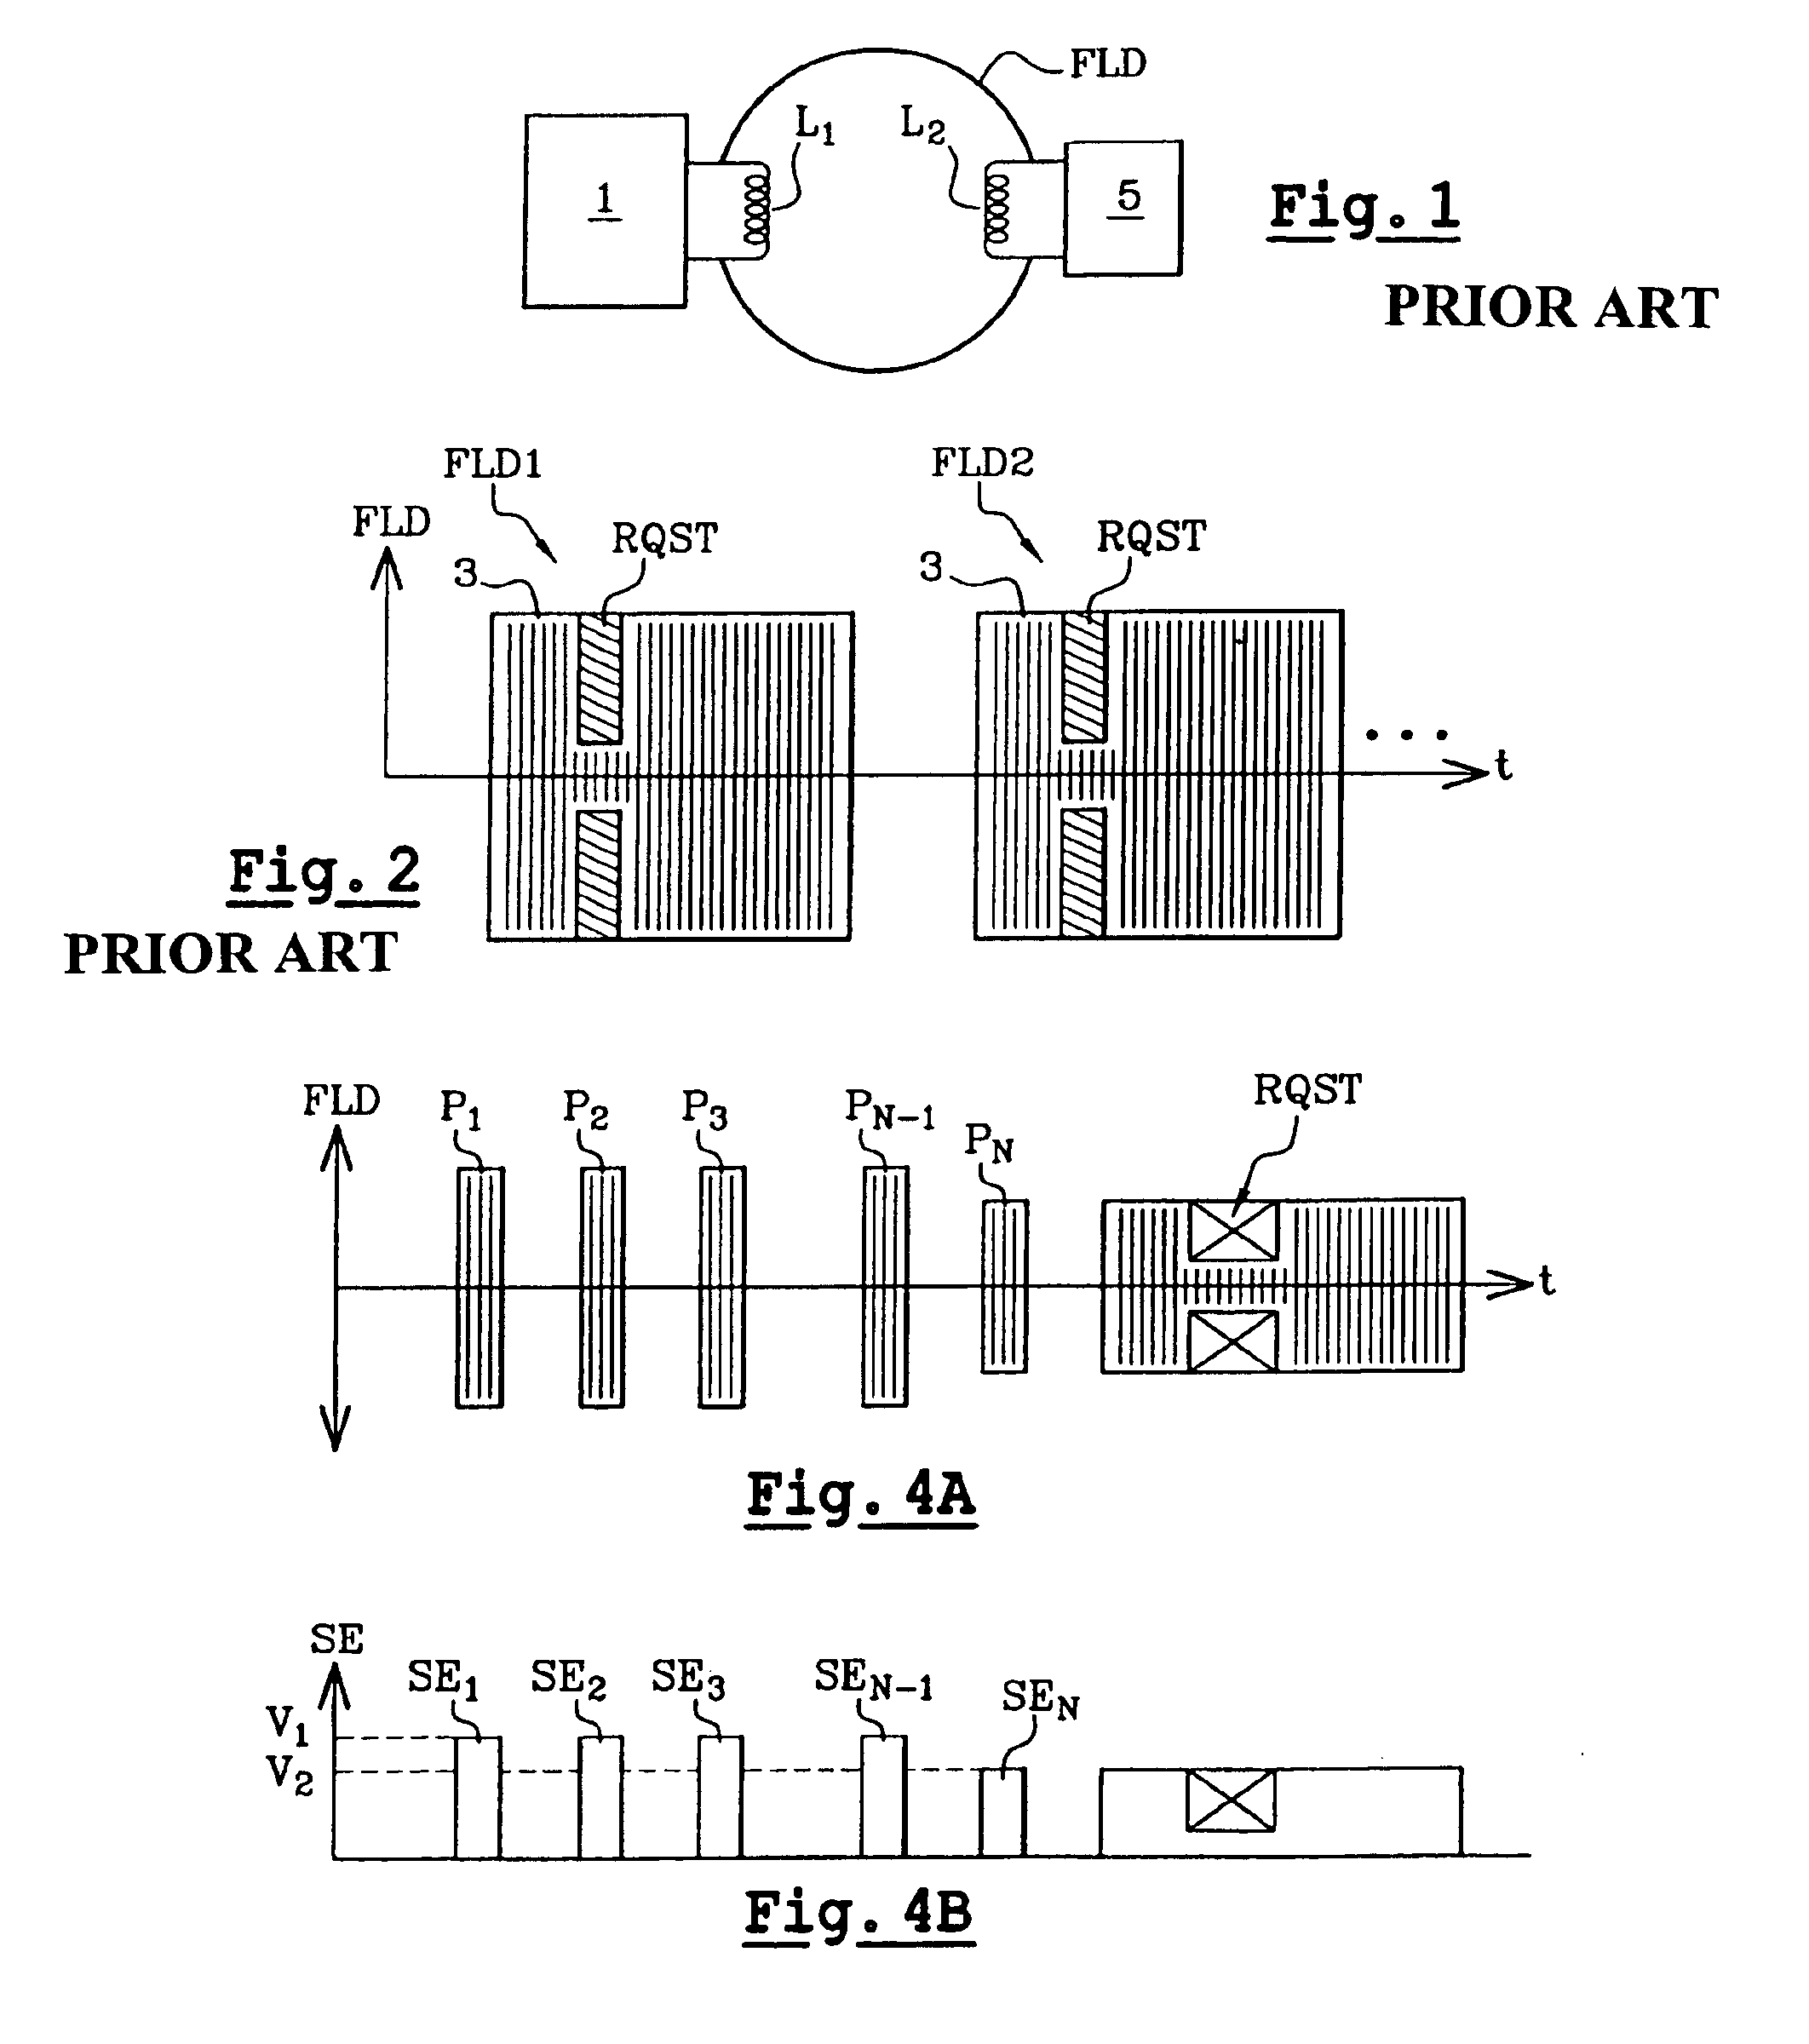 Non-contact integrated circuit reader comprising a low power consumption active standby mode